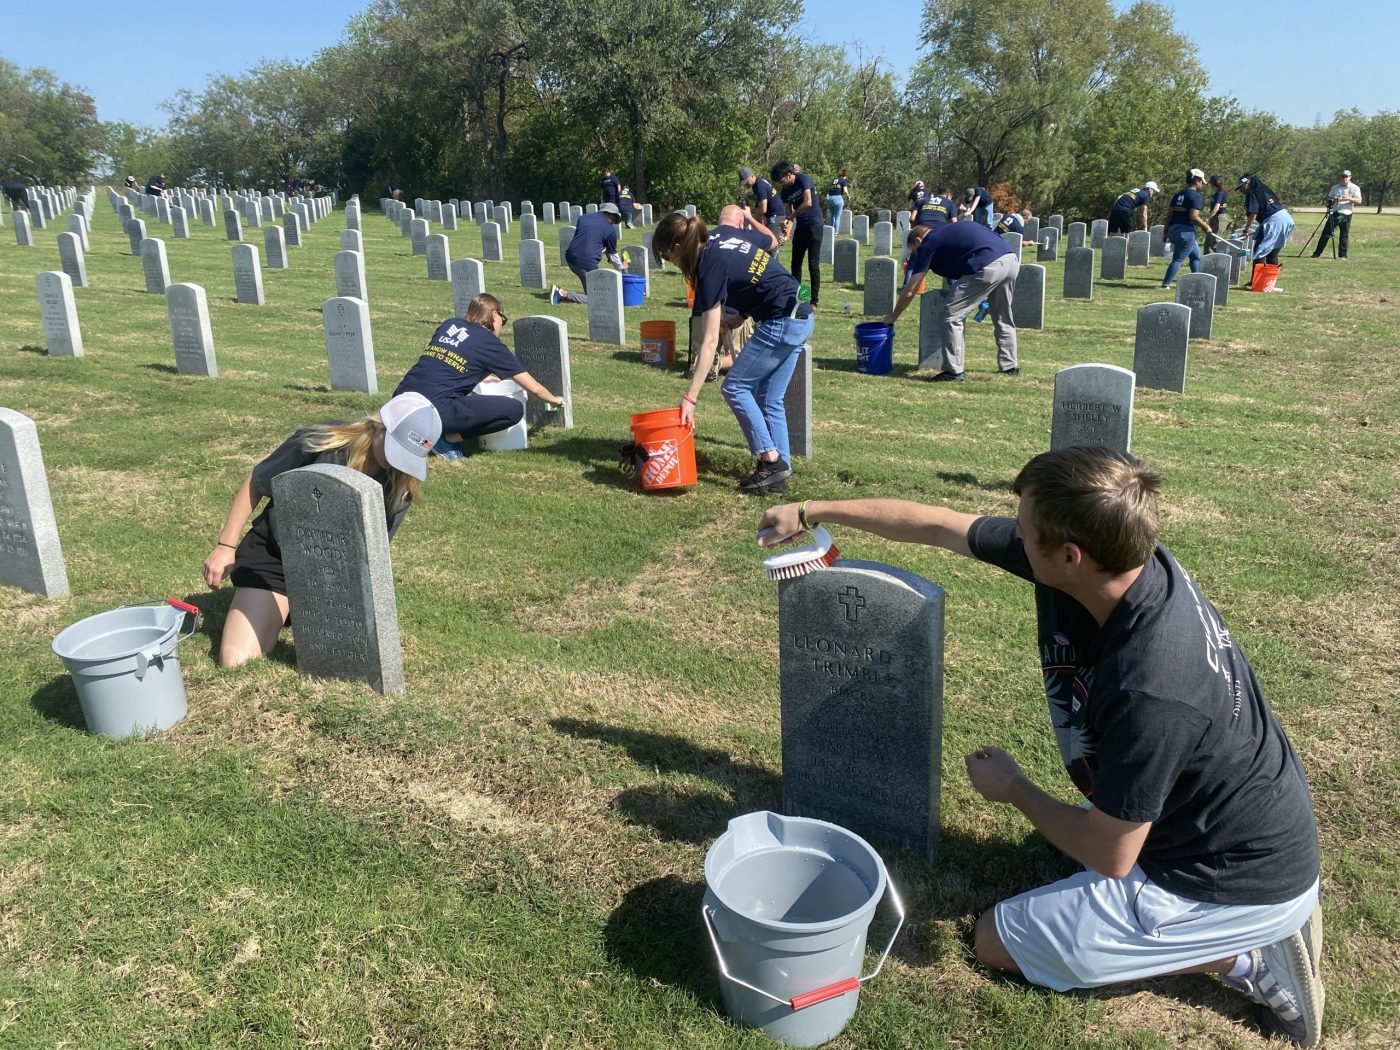 VA’s national cemeteries to host National Day of Service on 22nd anniversary of 9/11 attacks